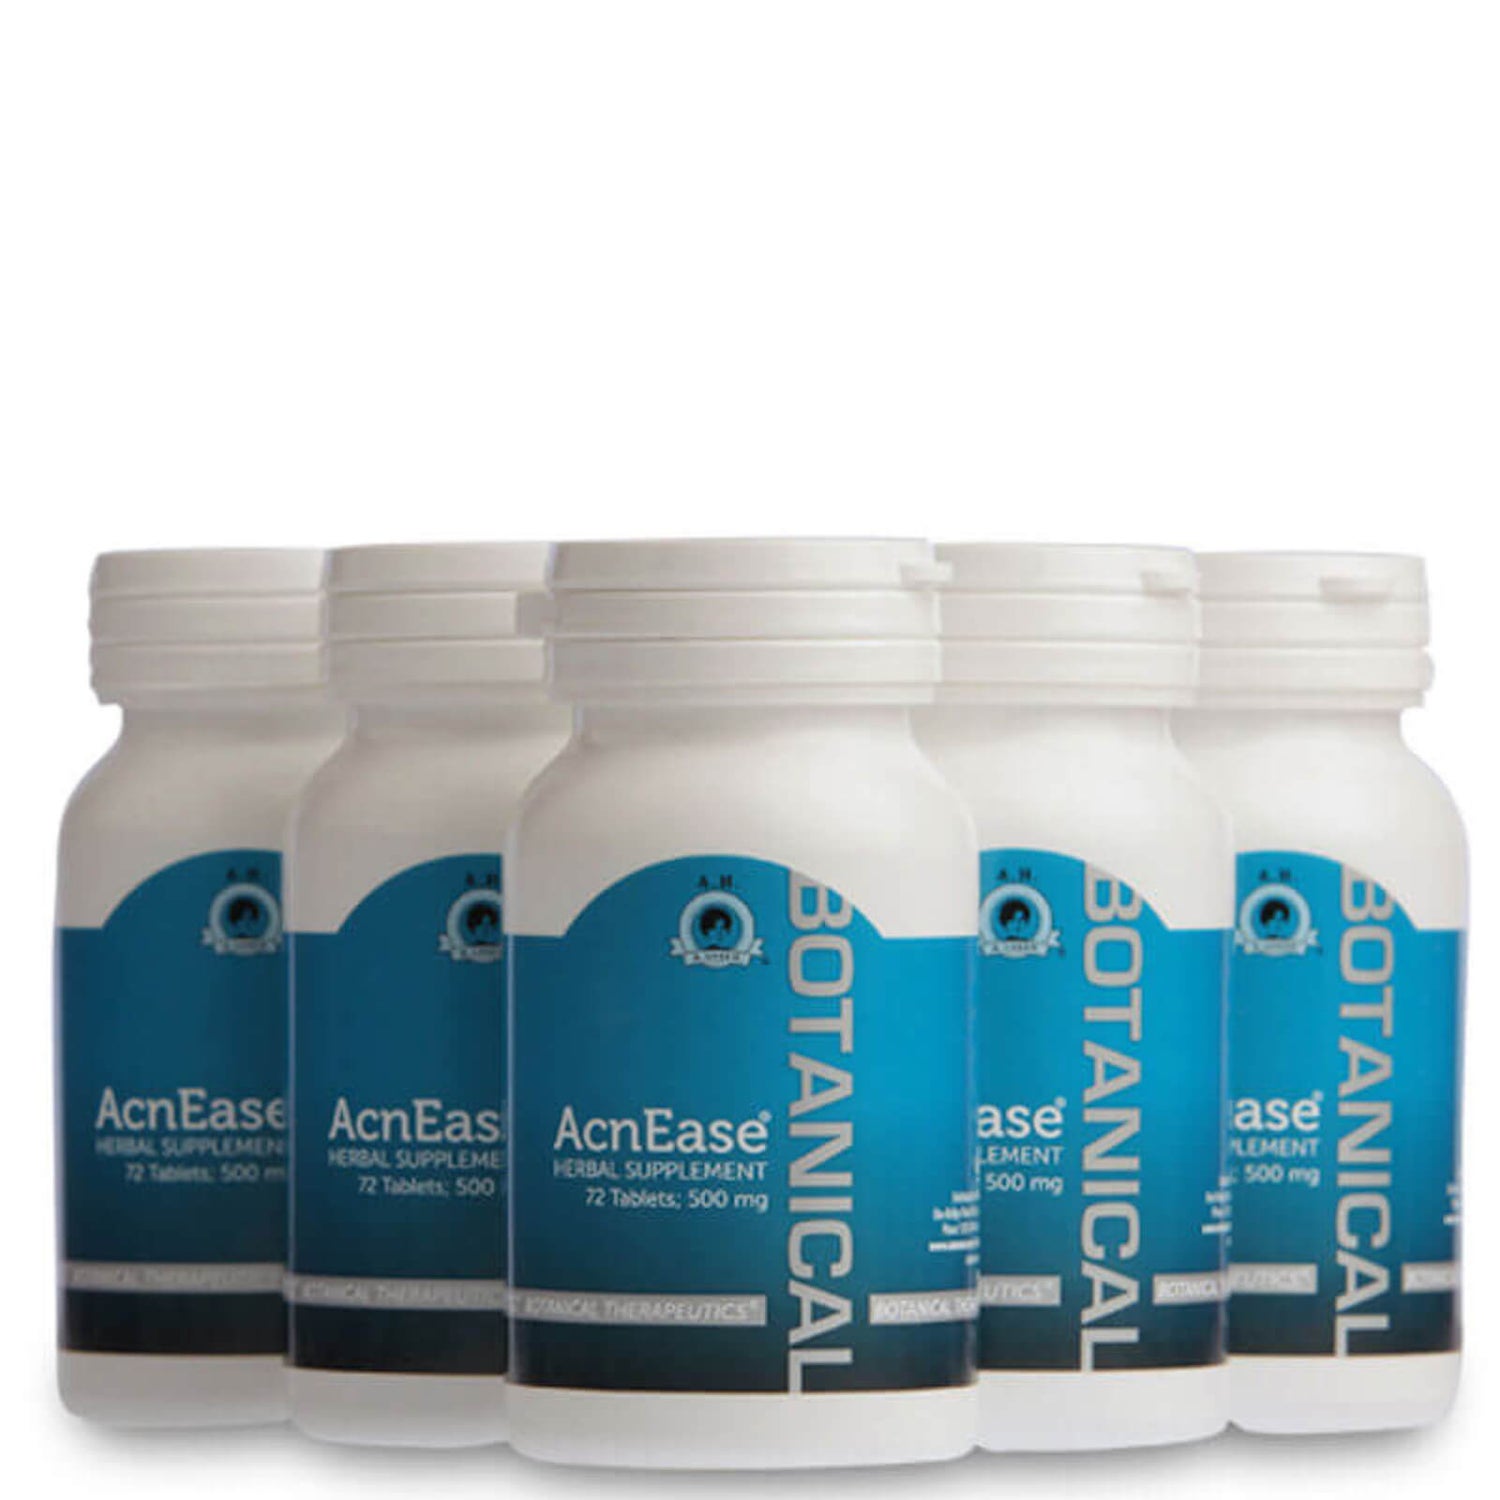 AcnEase Moderate Acne Treatment - 5 Bottles (Worth $197.50)